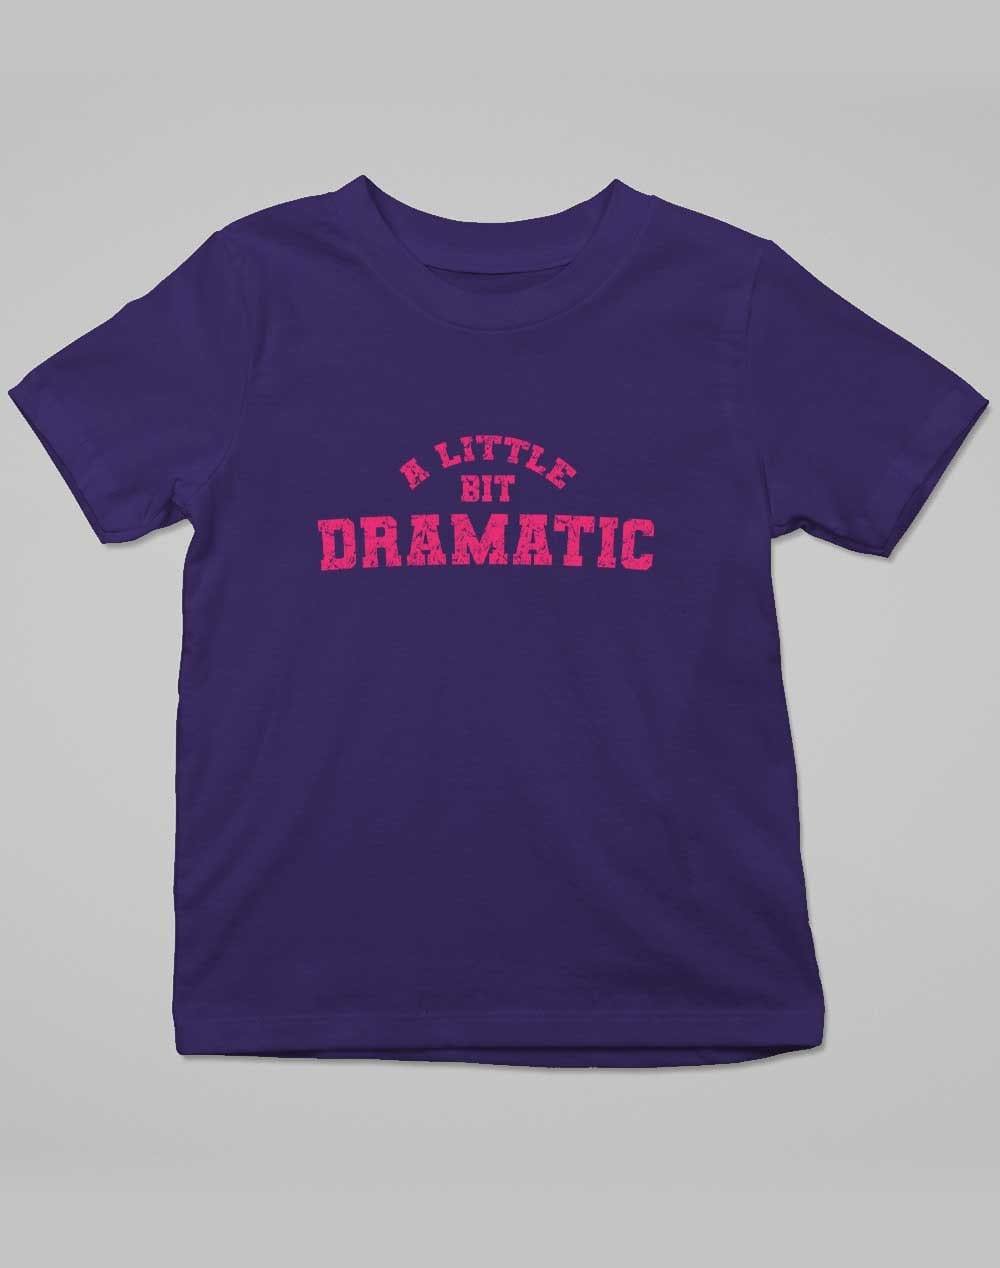 A Little Bit Dramatic Distressed Kids T-Shirt 3-4 years / Navy  - Off World Tees